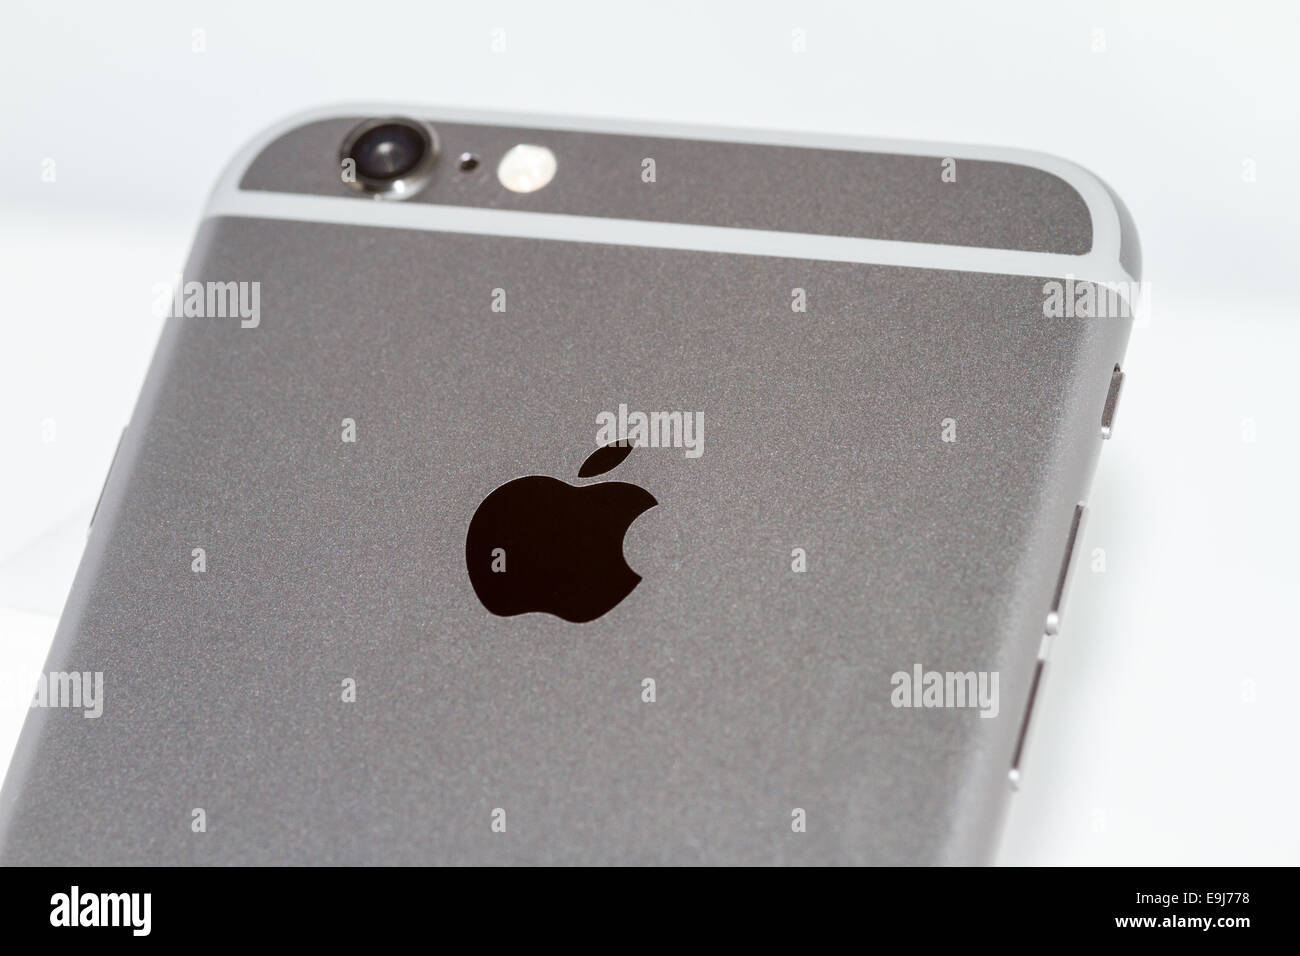 iPhone 6 rear logo with camera lens visible Stock Photo